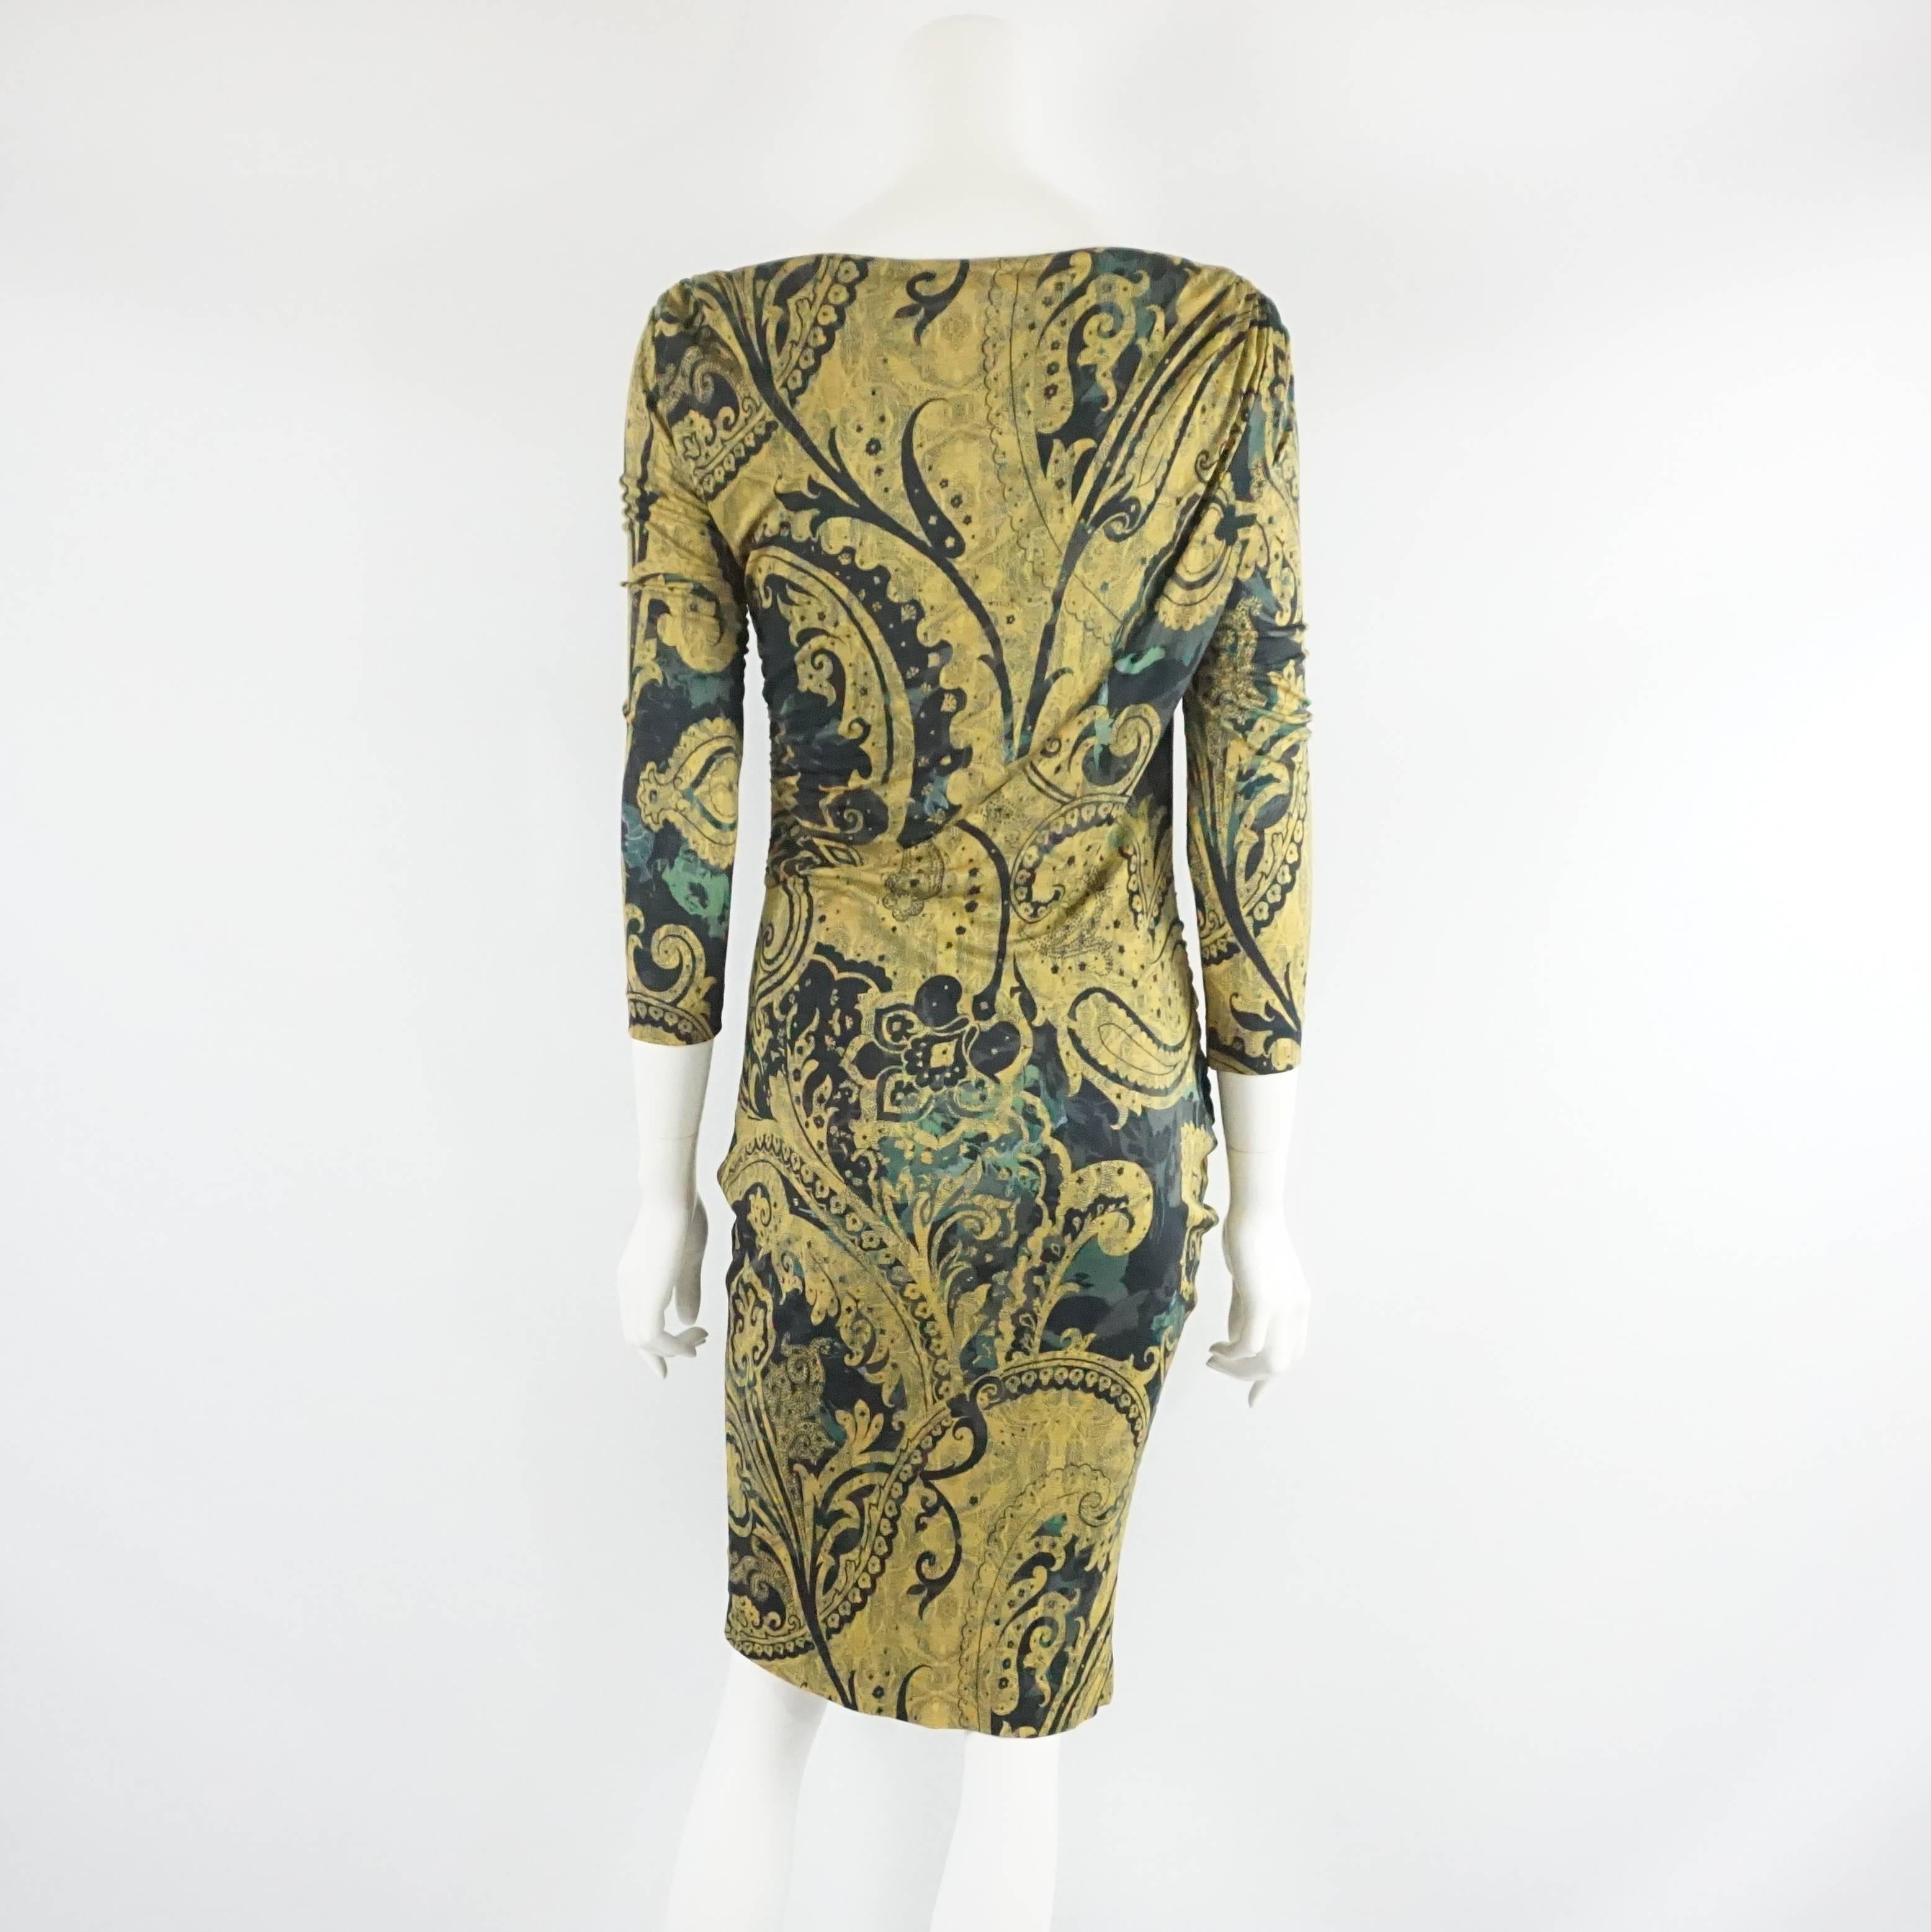 Brown Etro Black and Gold Paisley Print Dress - M